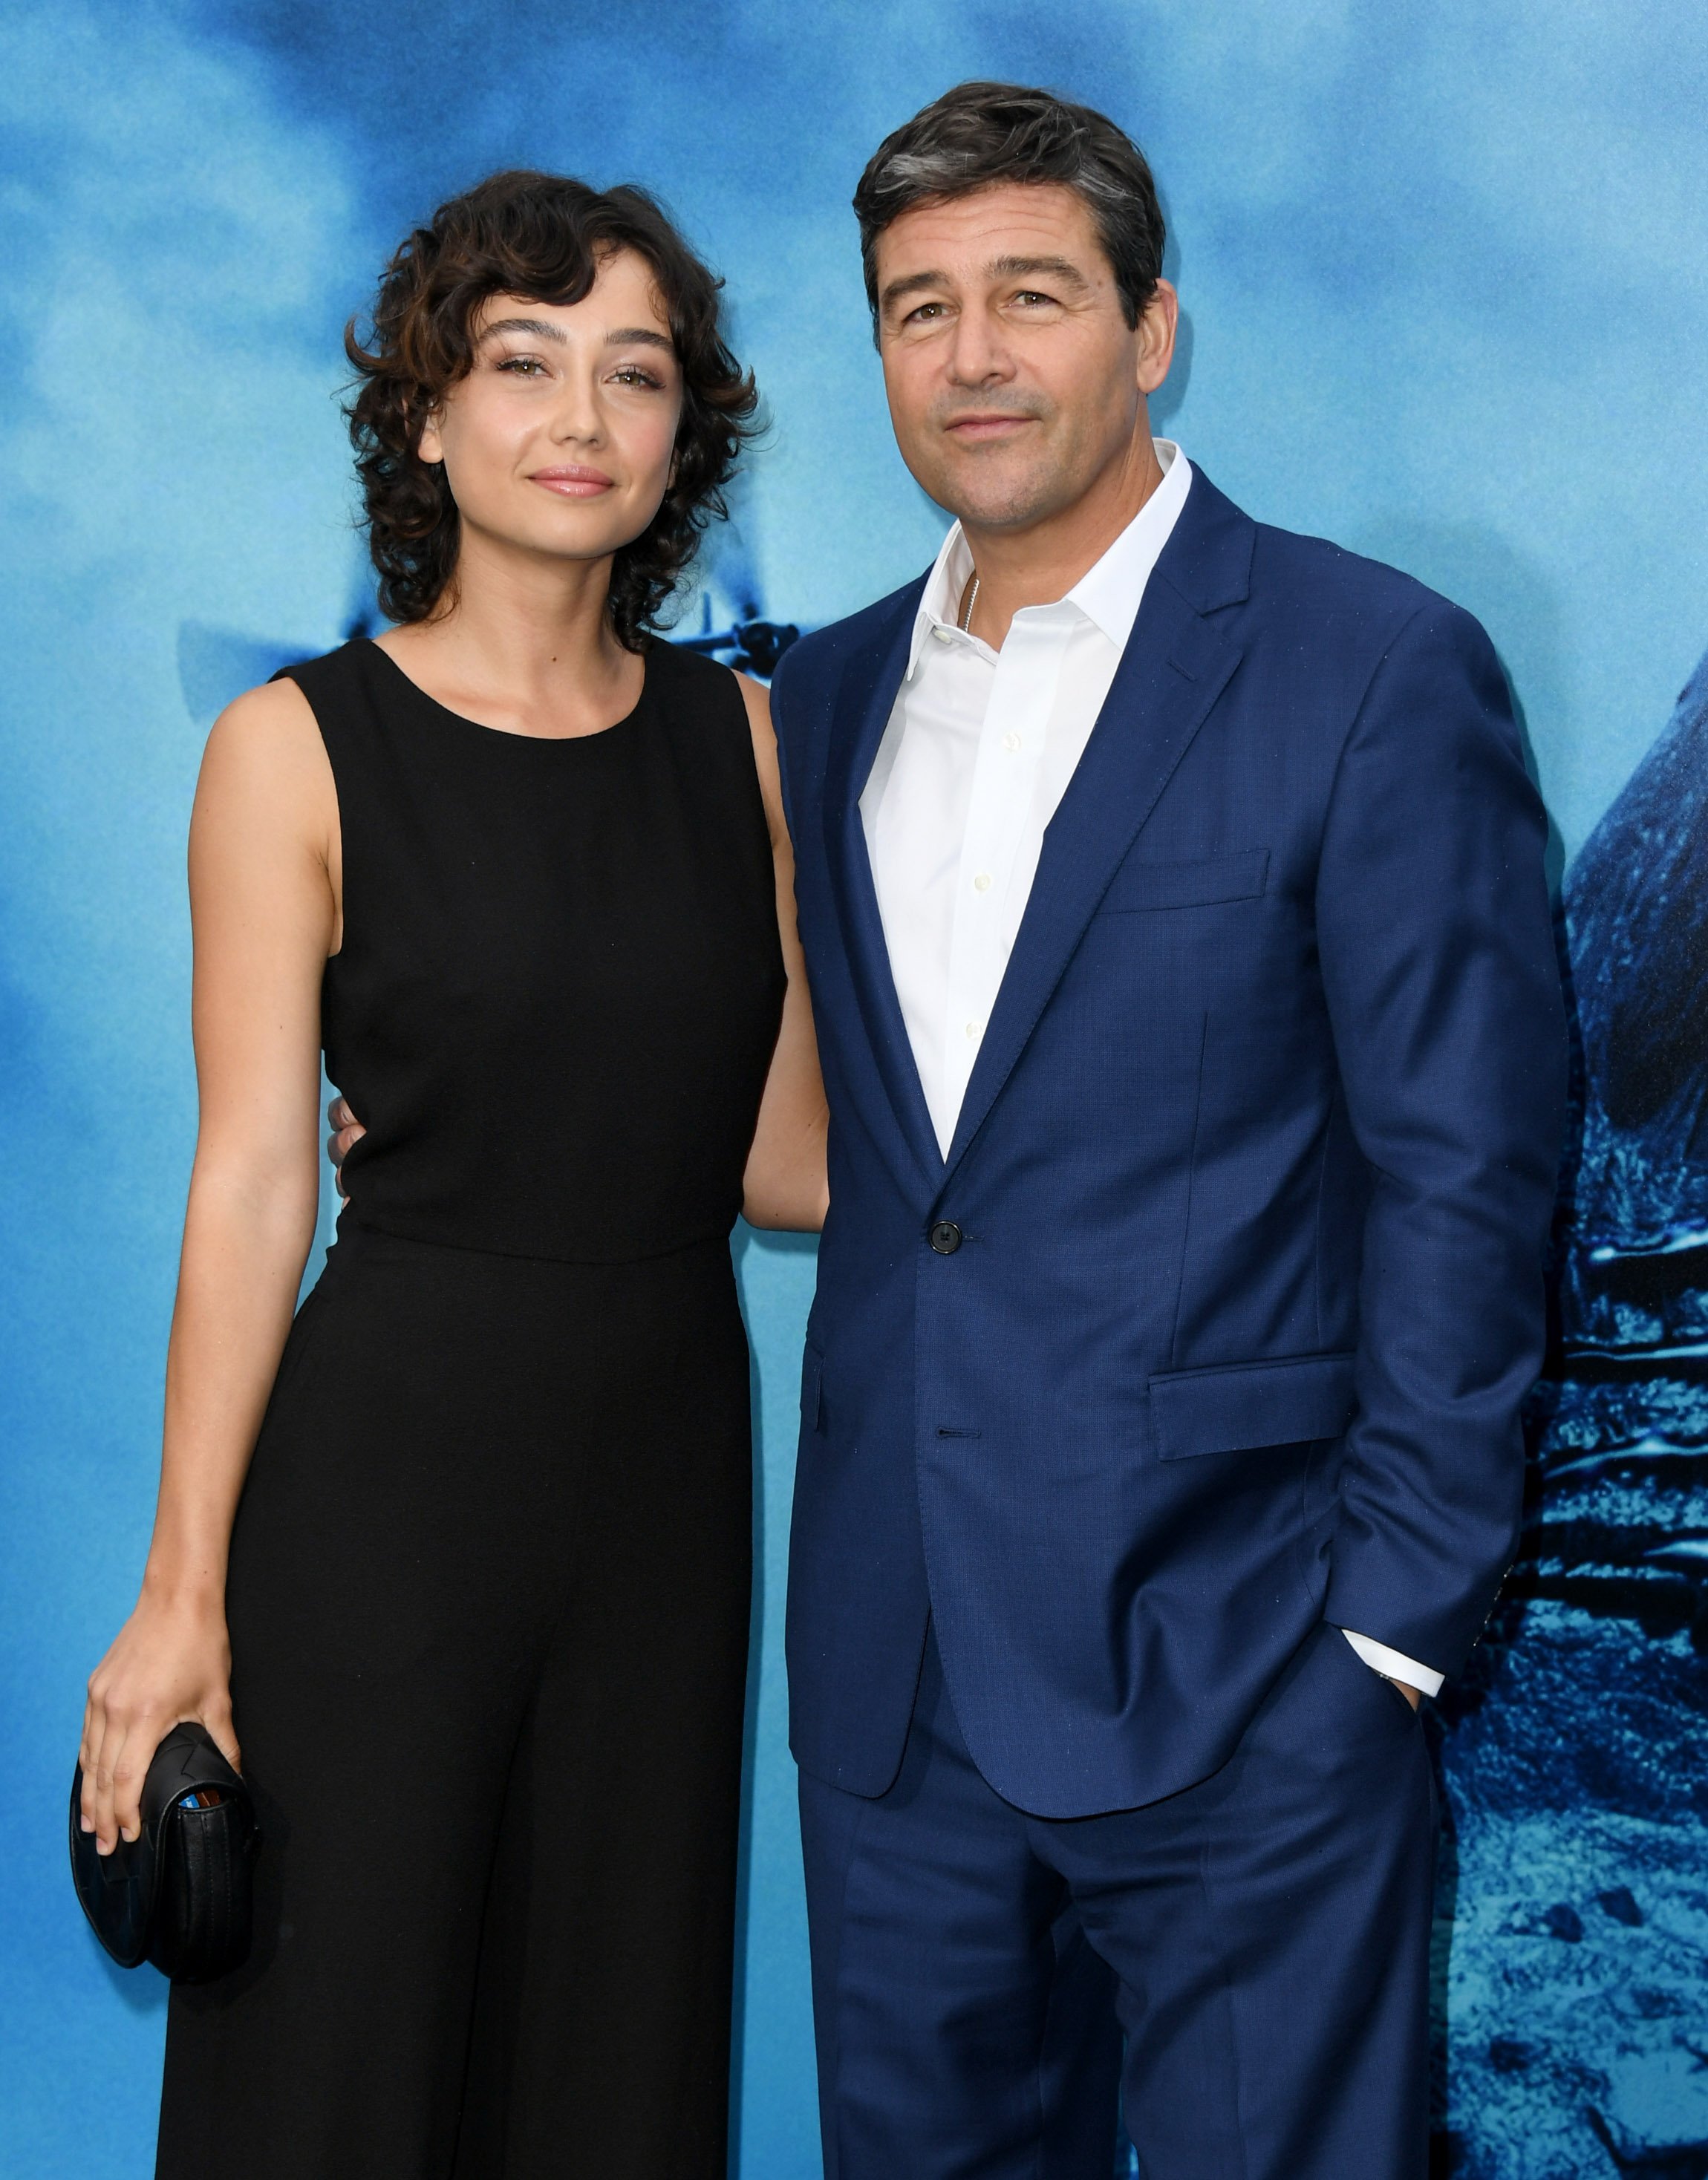 Kyle Chandler and Sydney Chandler at the premiere of "Godzilla: King Of The Monsters" on May 18, 2019, in California. | Source: Getty Images